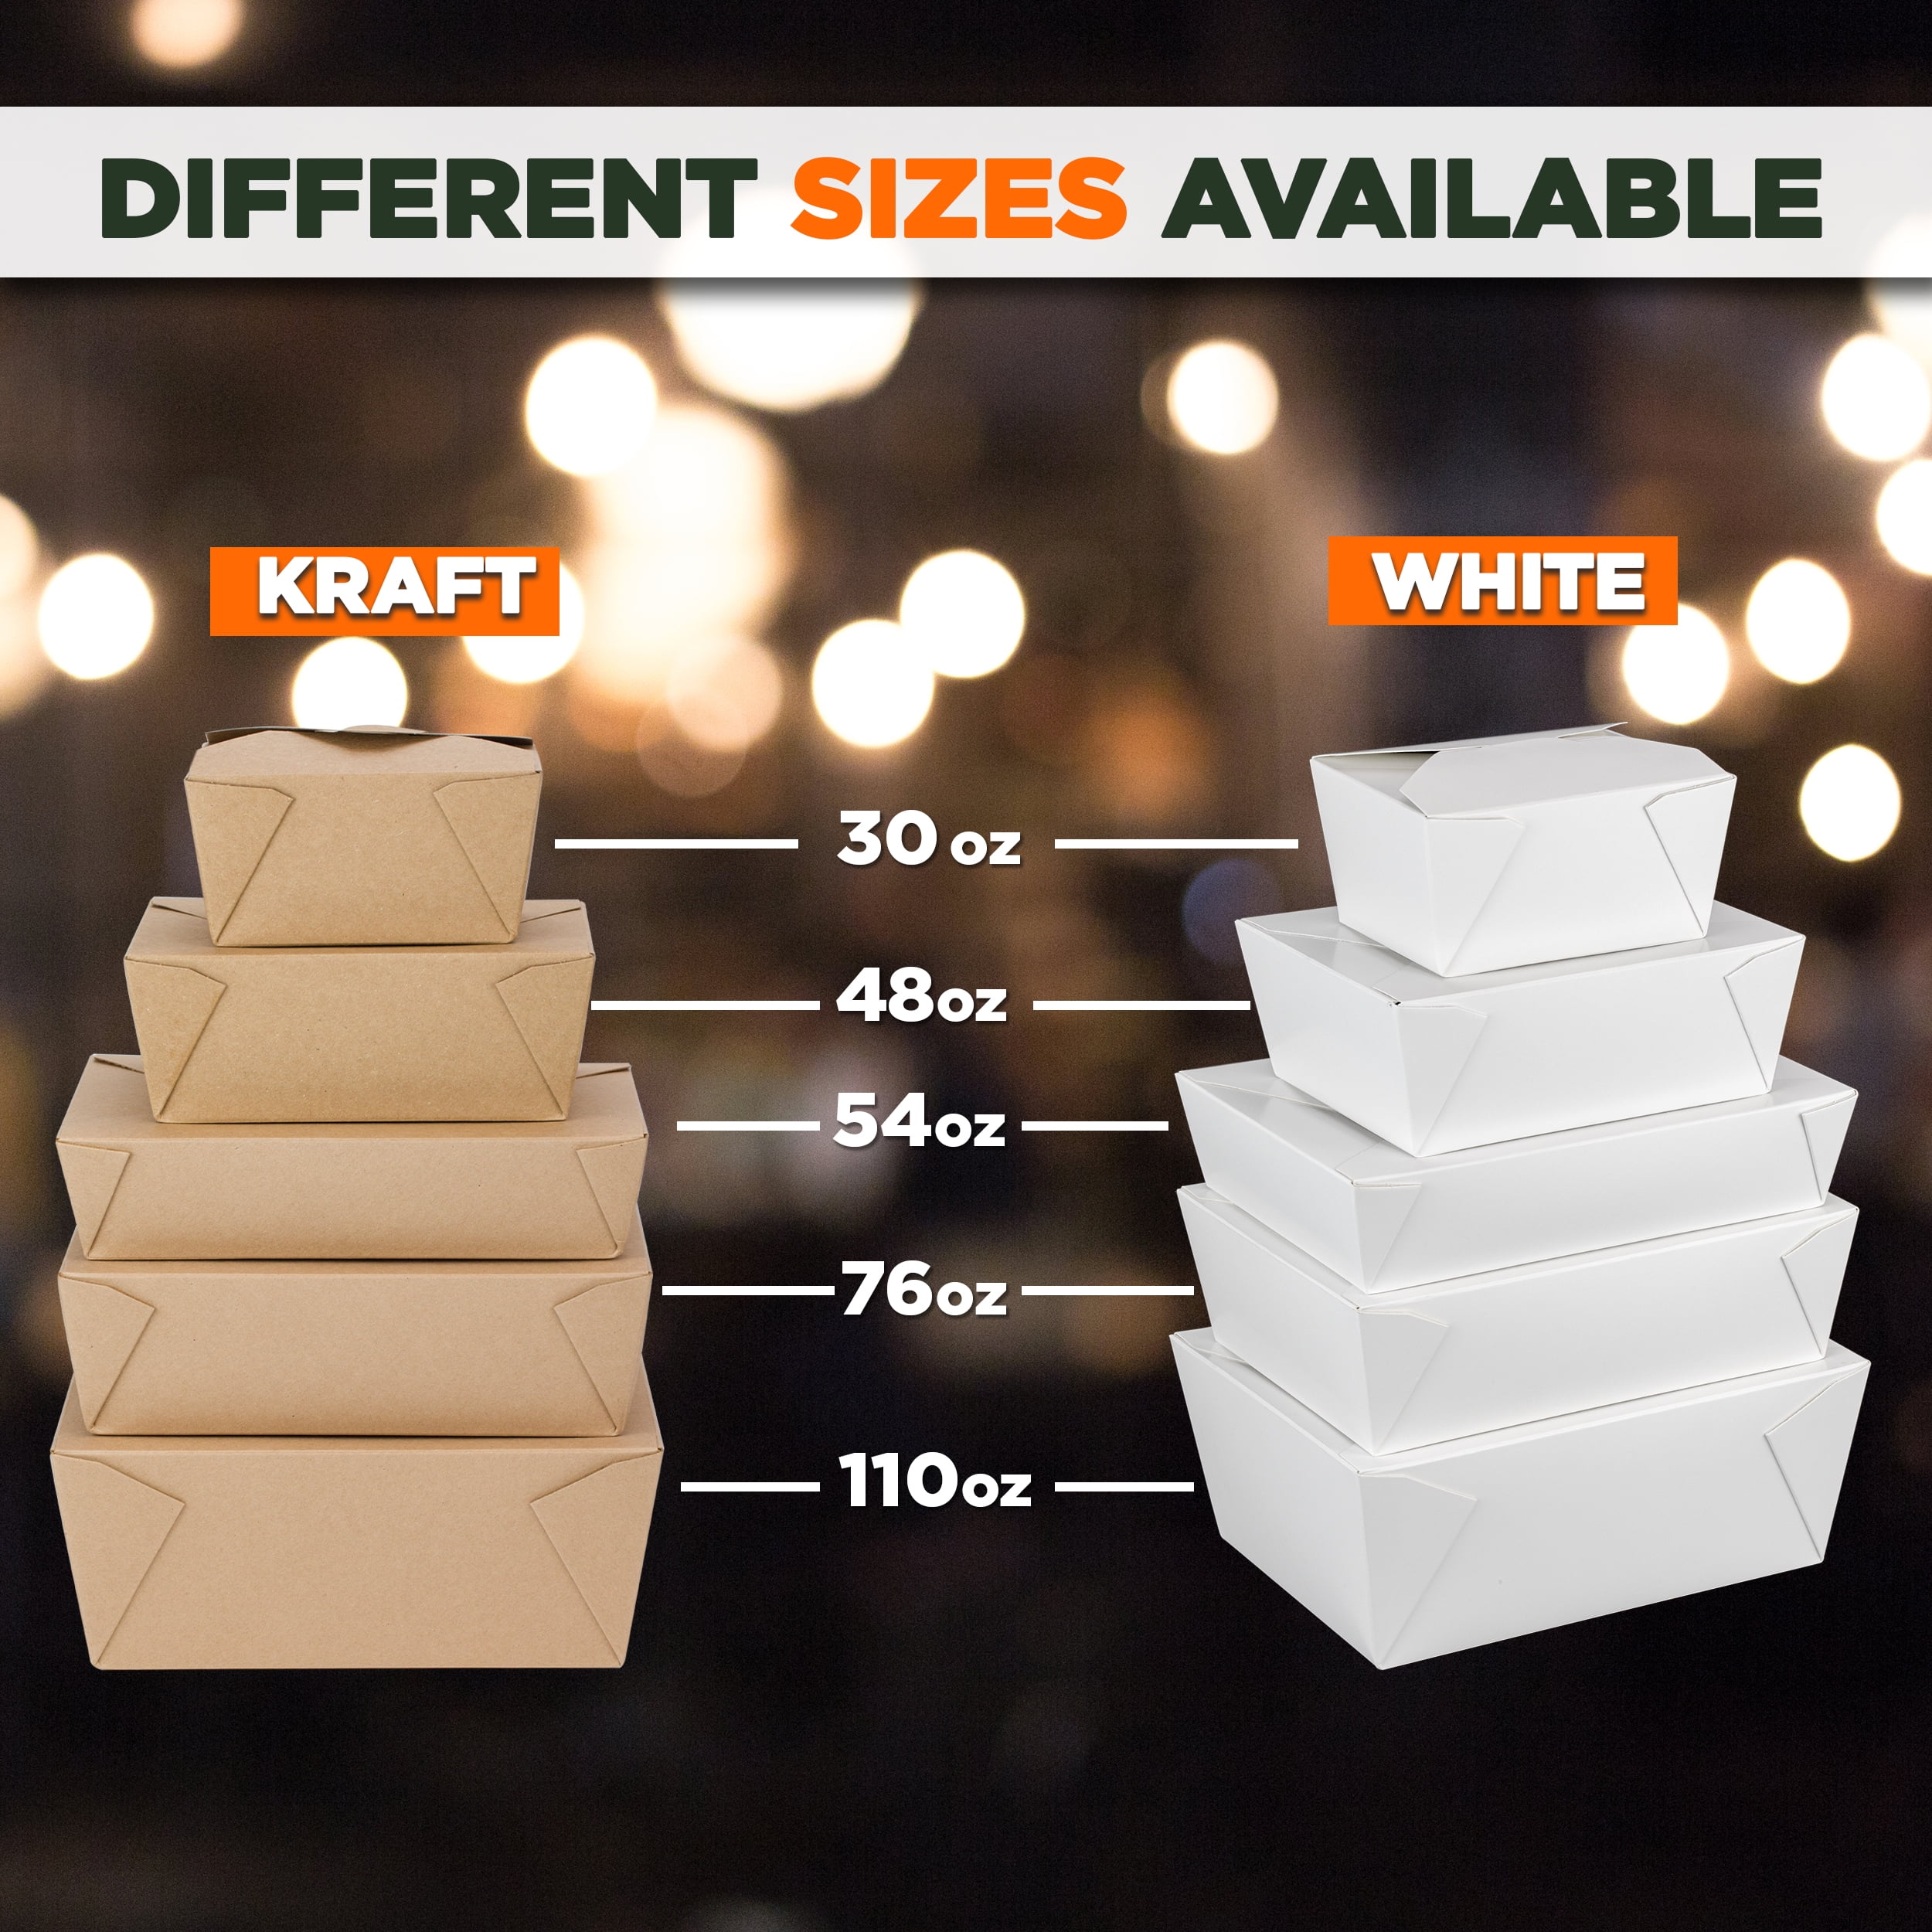 TAKE-OUT/ Container Large, 3 Comp, White 200/cs-Food Service